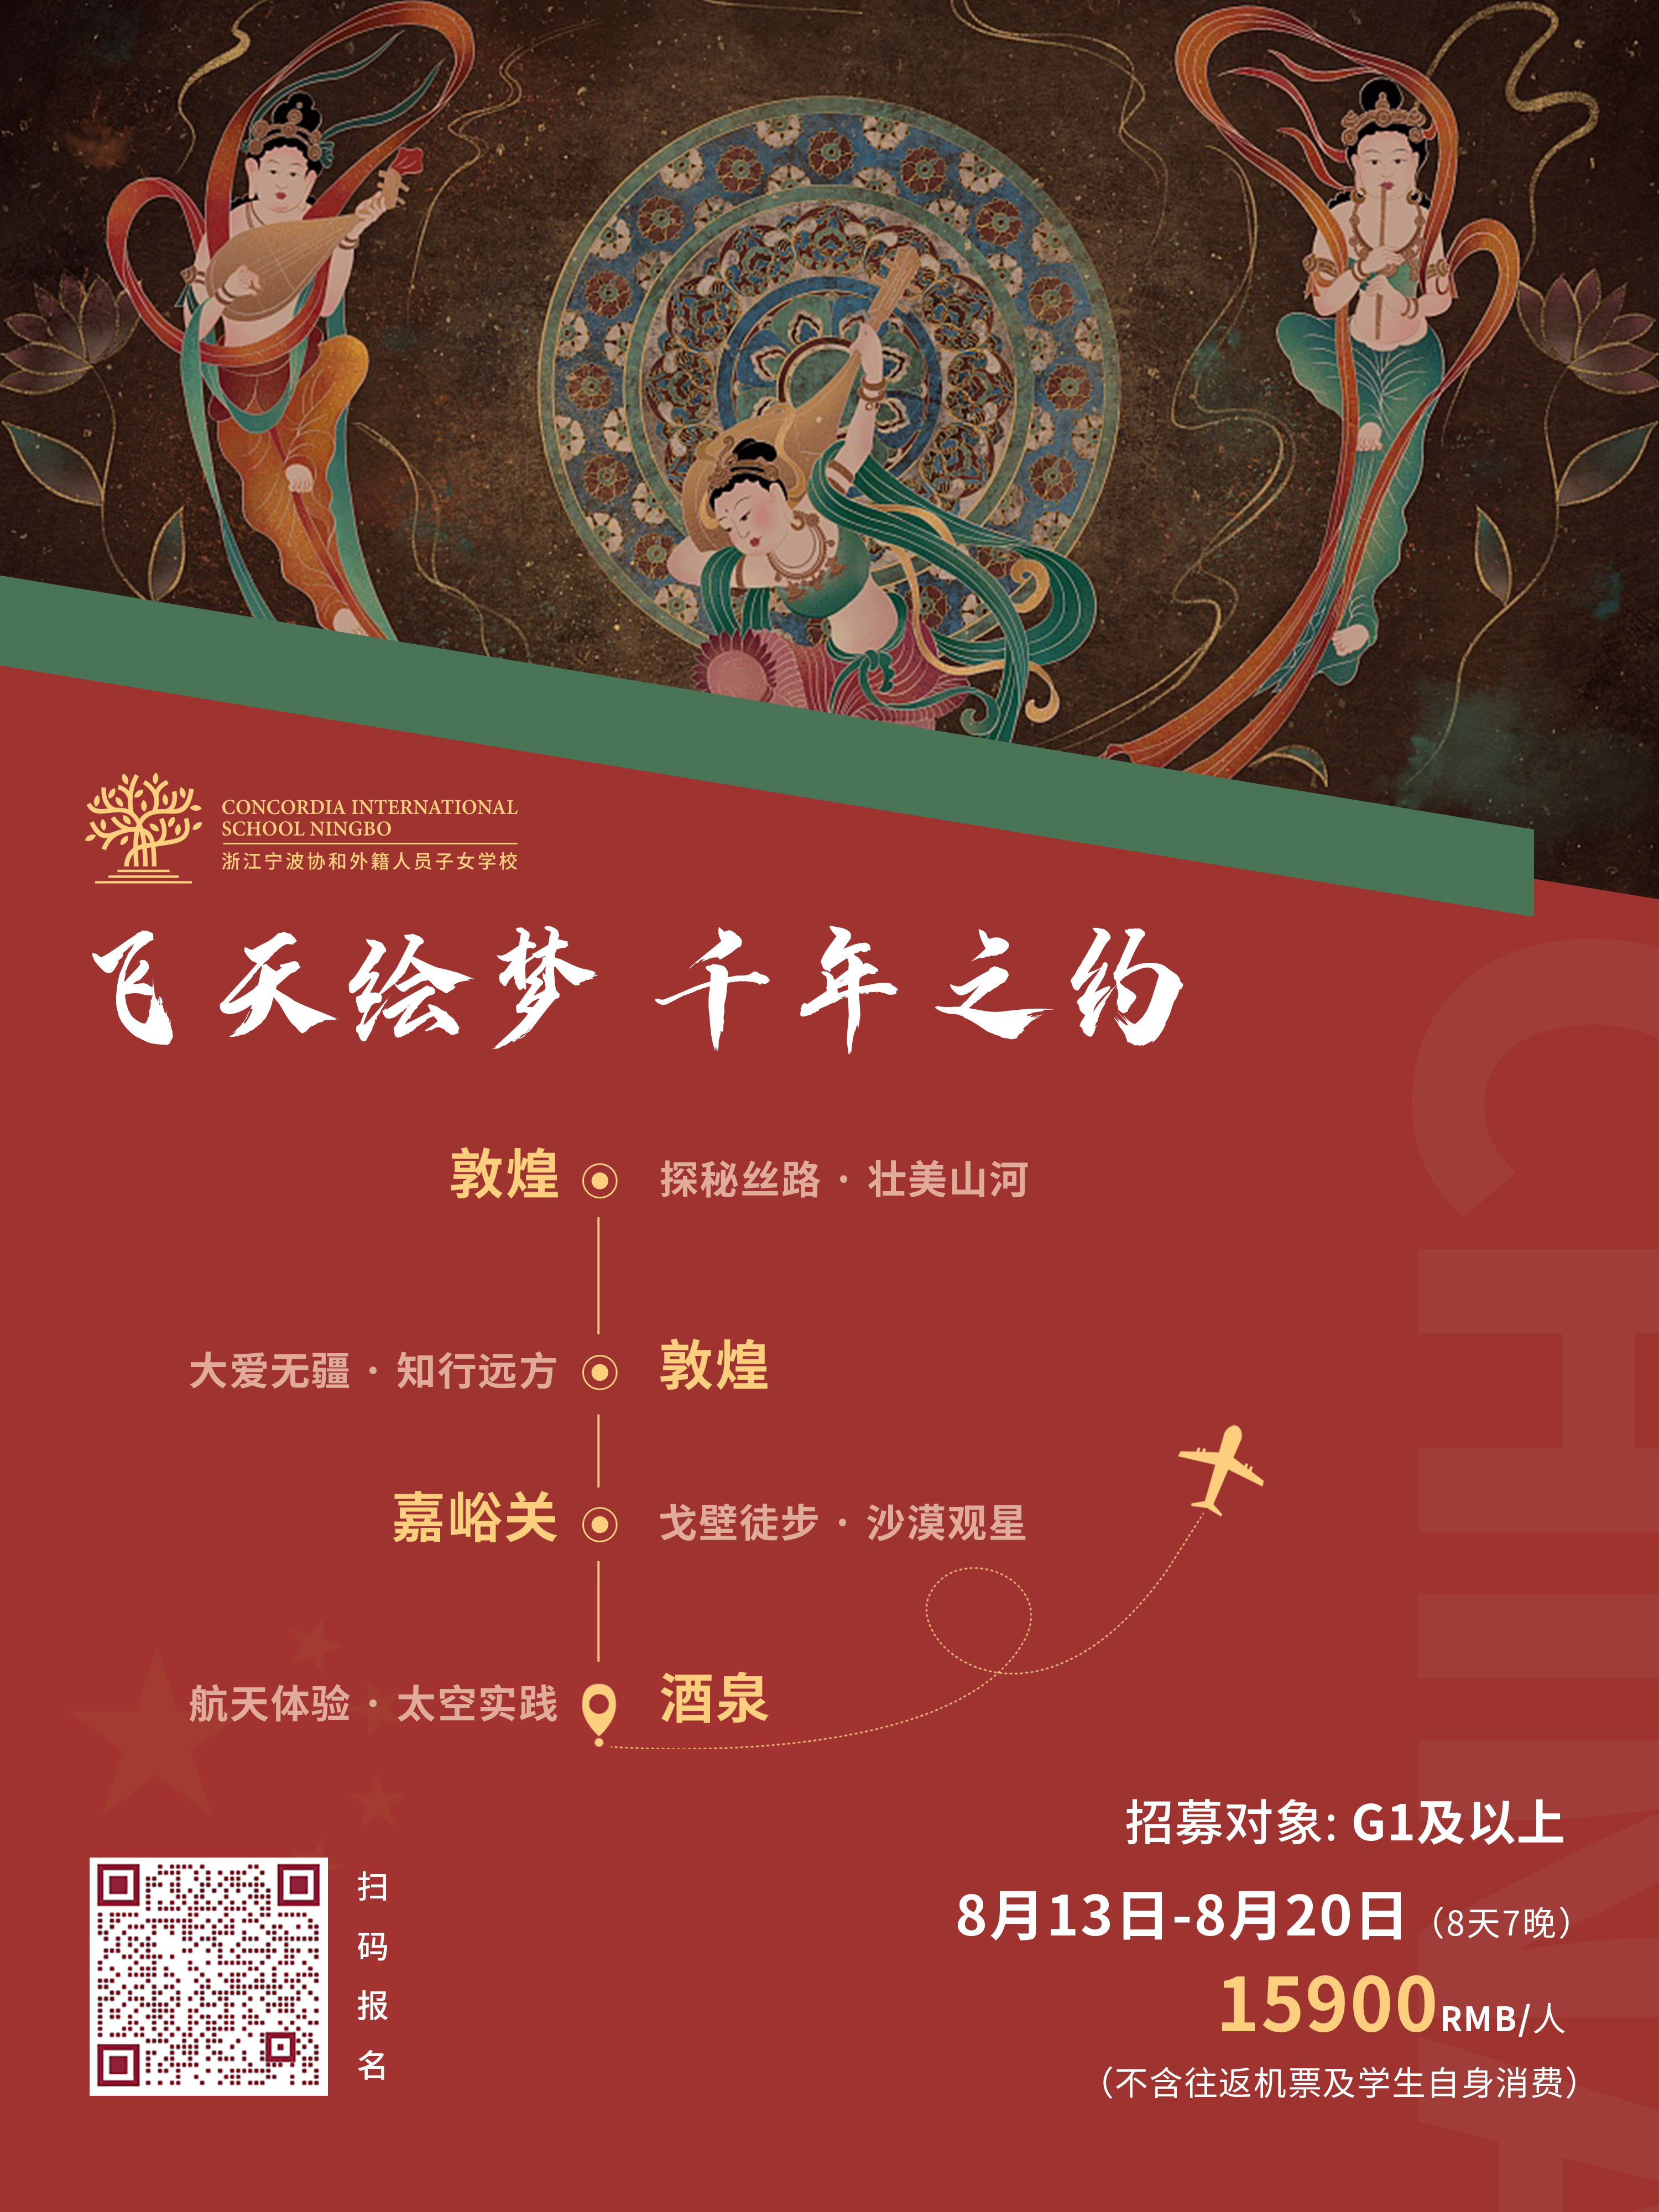 Summer Camp | Exploring Dunhuang Culture and Aesthetics